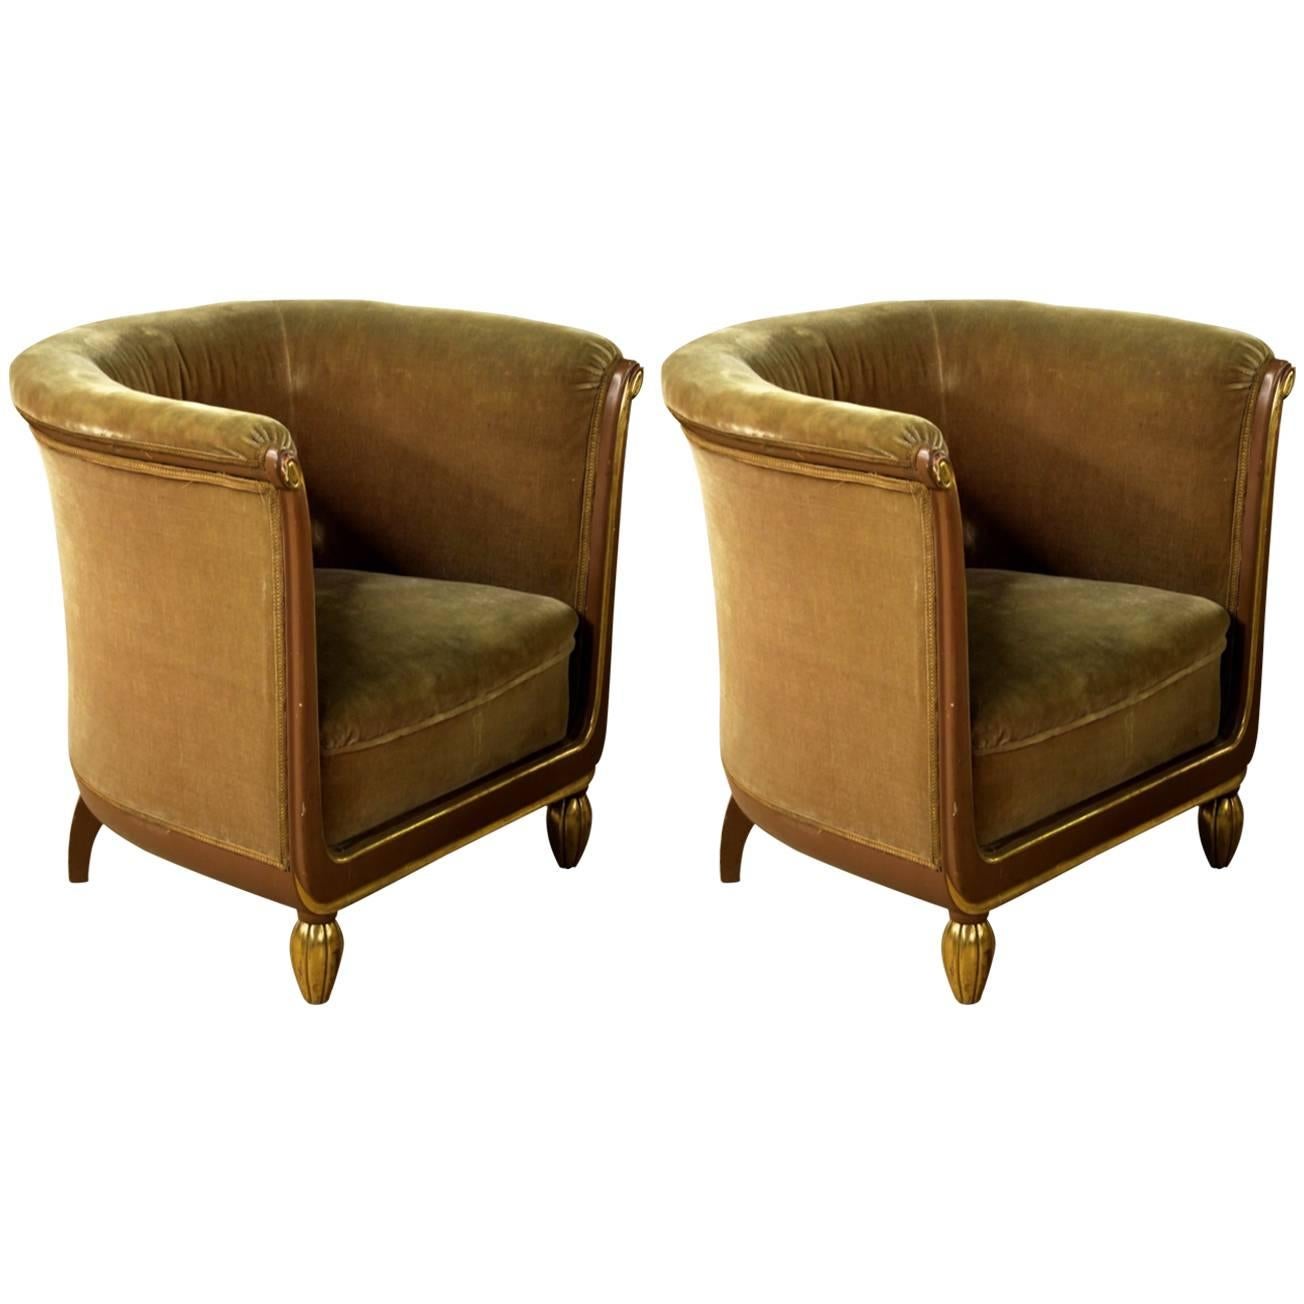 Paul Follot Pair of Lacquer and Gilt Sculpted Club Chairs